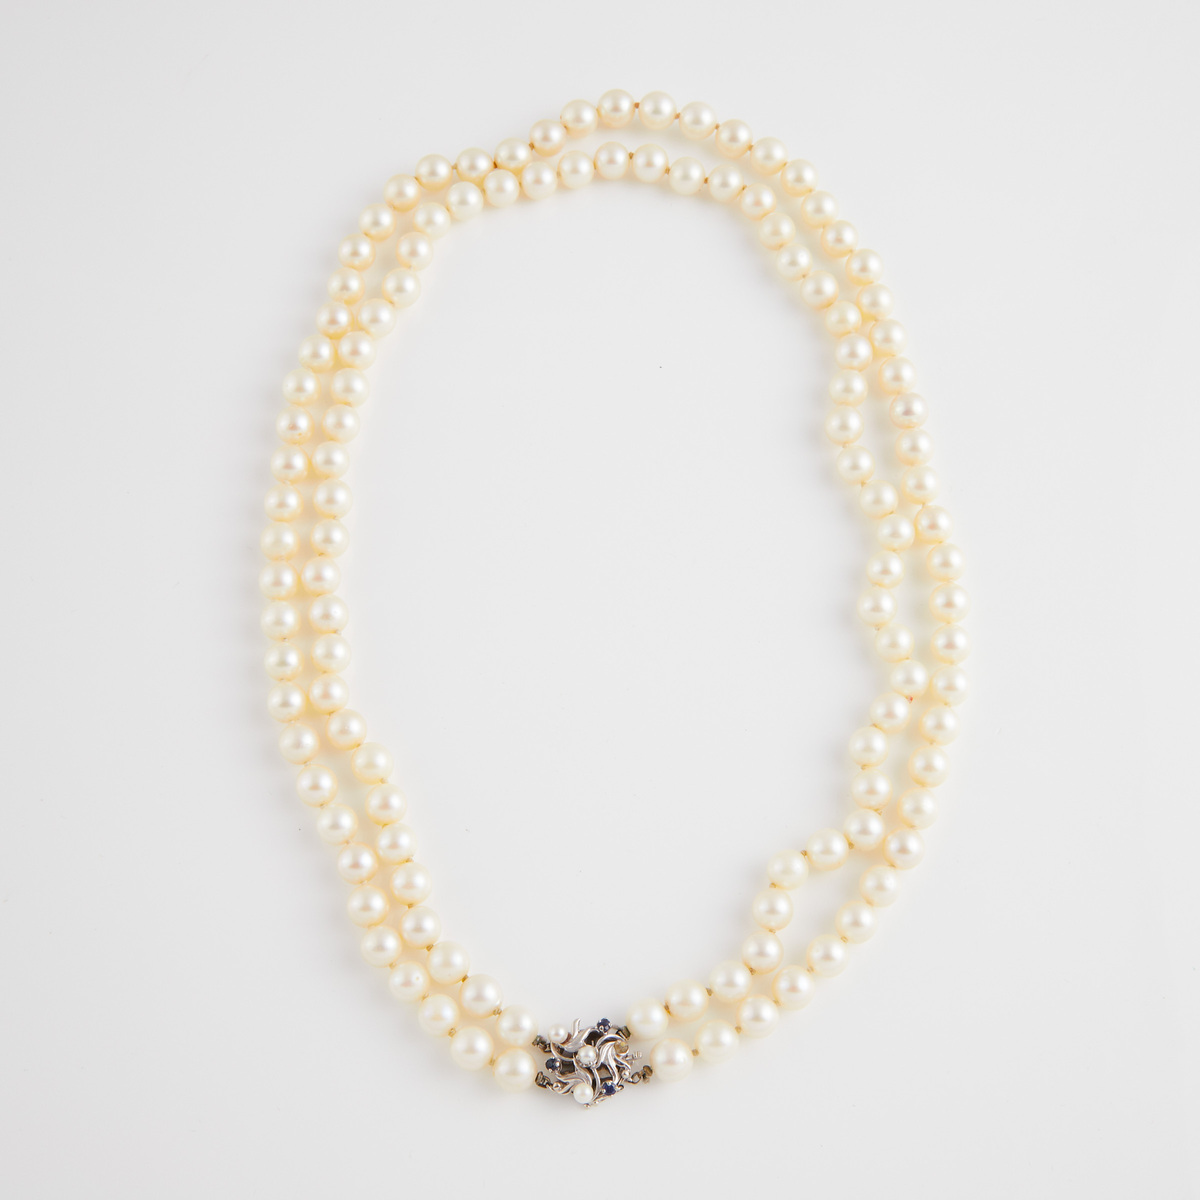 Double Strand Cultured Pearl Necklace, (8.8mm to 9.2mm) completed with a 14k white gold clasp set wi